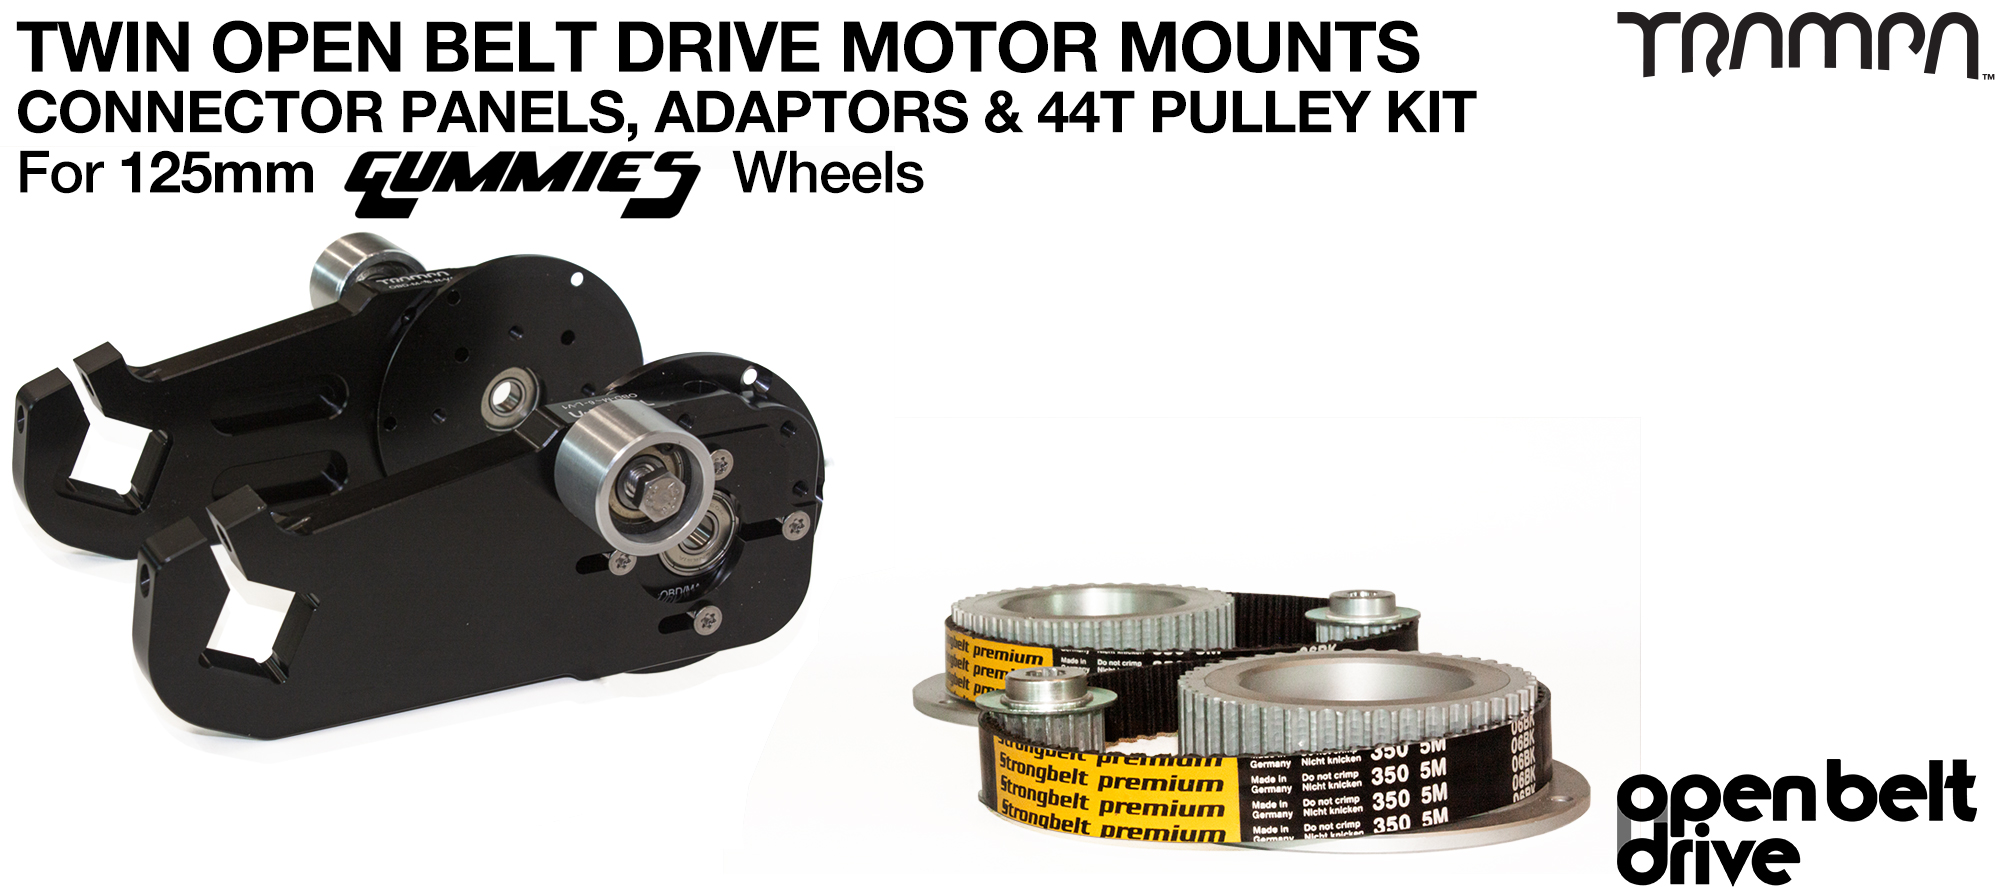 66T OBD Motor Mount & 44 tooth Pulley - TWIN